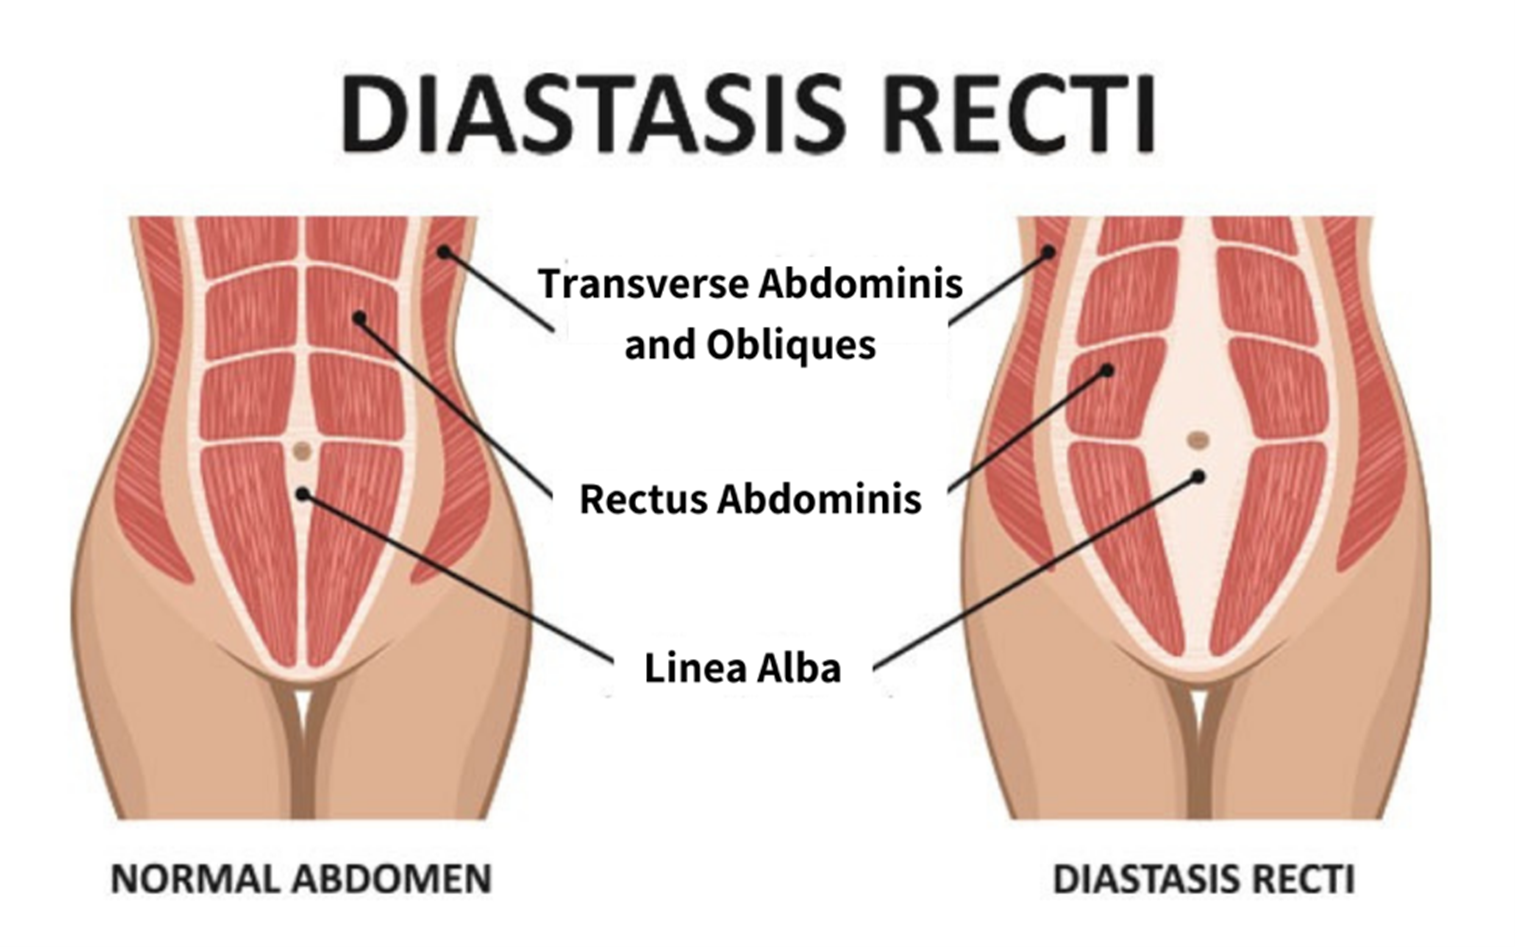 Facts and Tips for Healing Diastasis Recti, Part 1